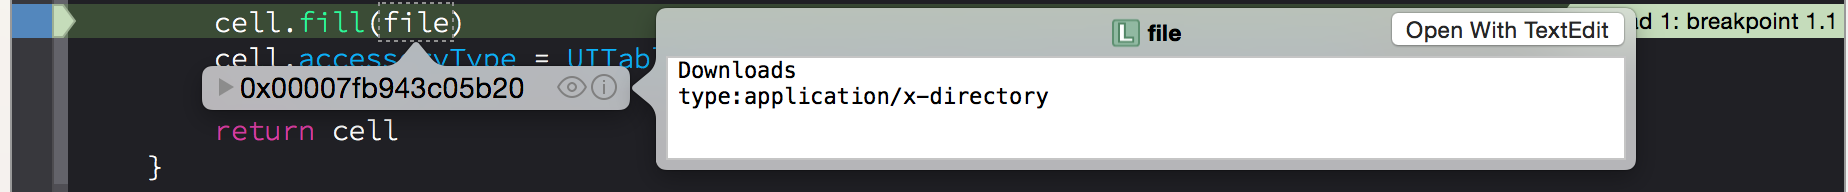 Quick look of an object in XCode